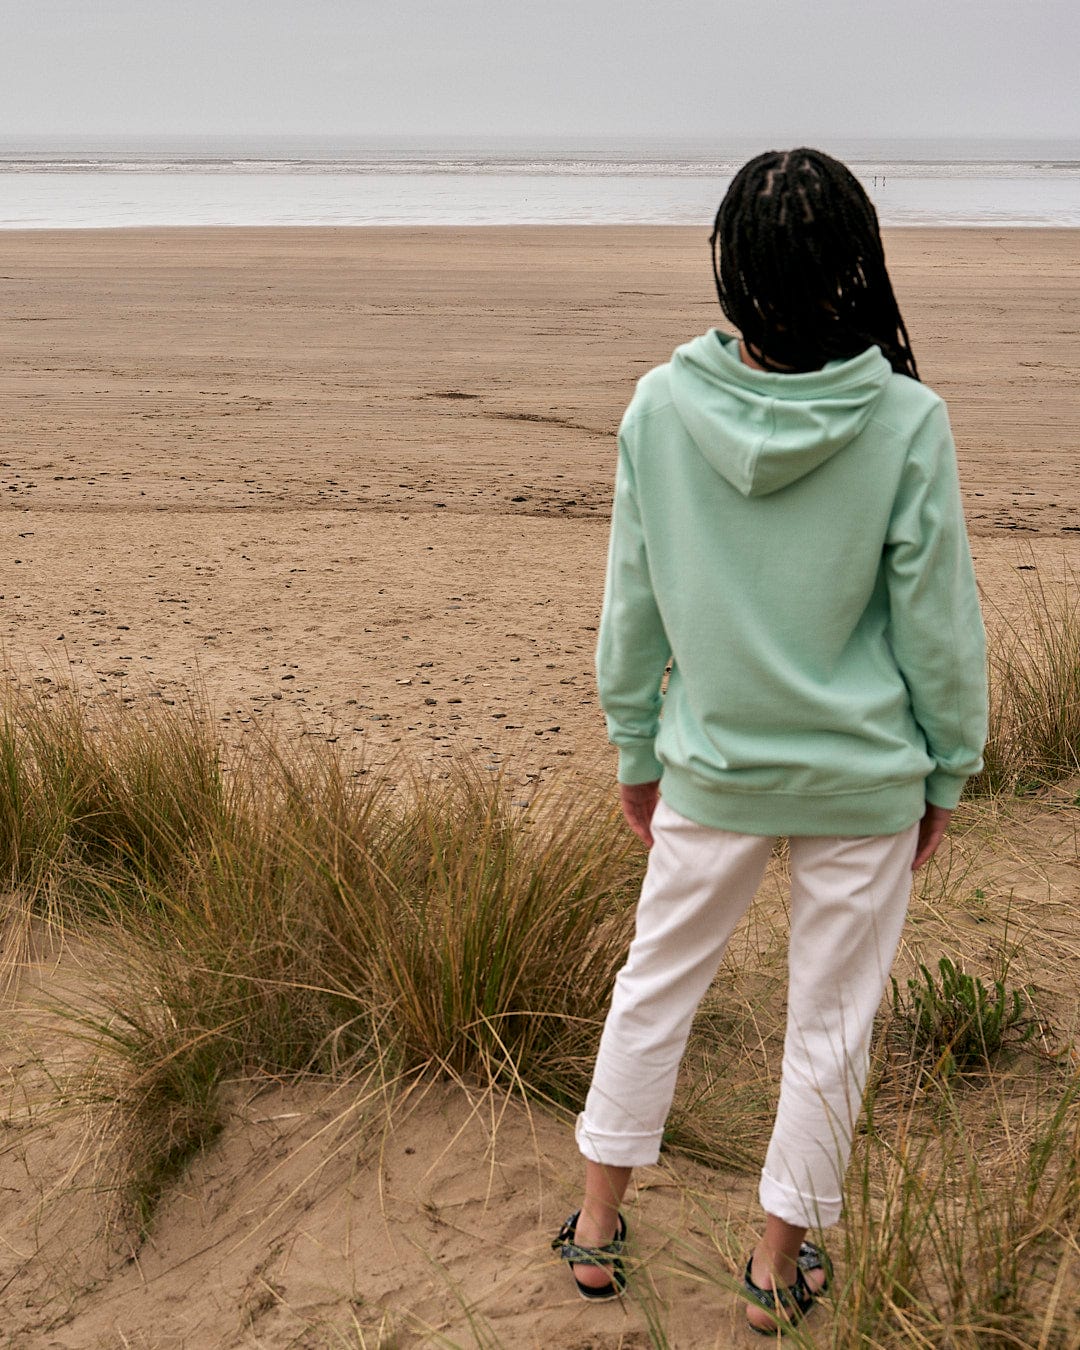 A person standing on a beach looking at the ocean, wearing the Saltrock Shelley - Womens Pop Hoodie in Light Green.